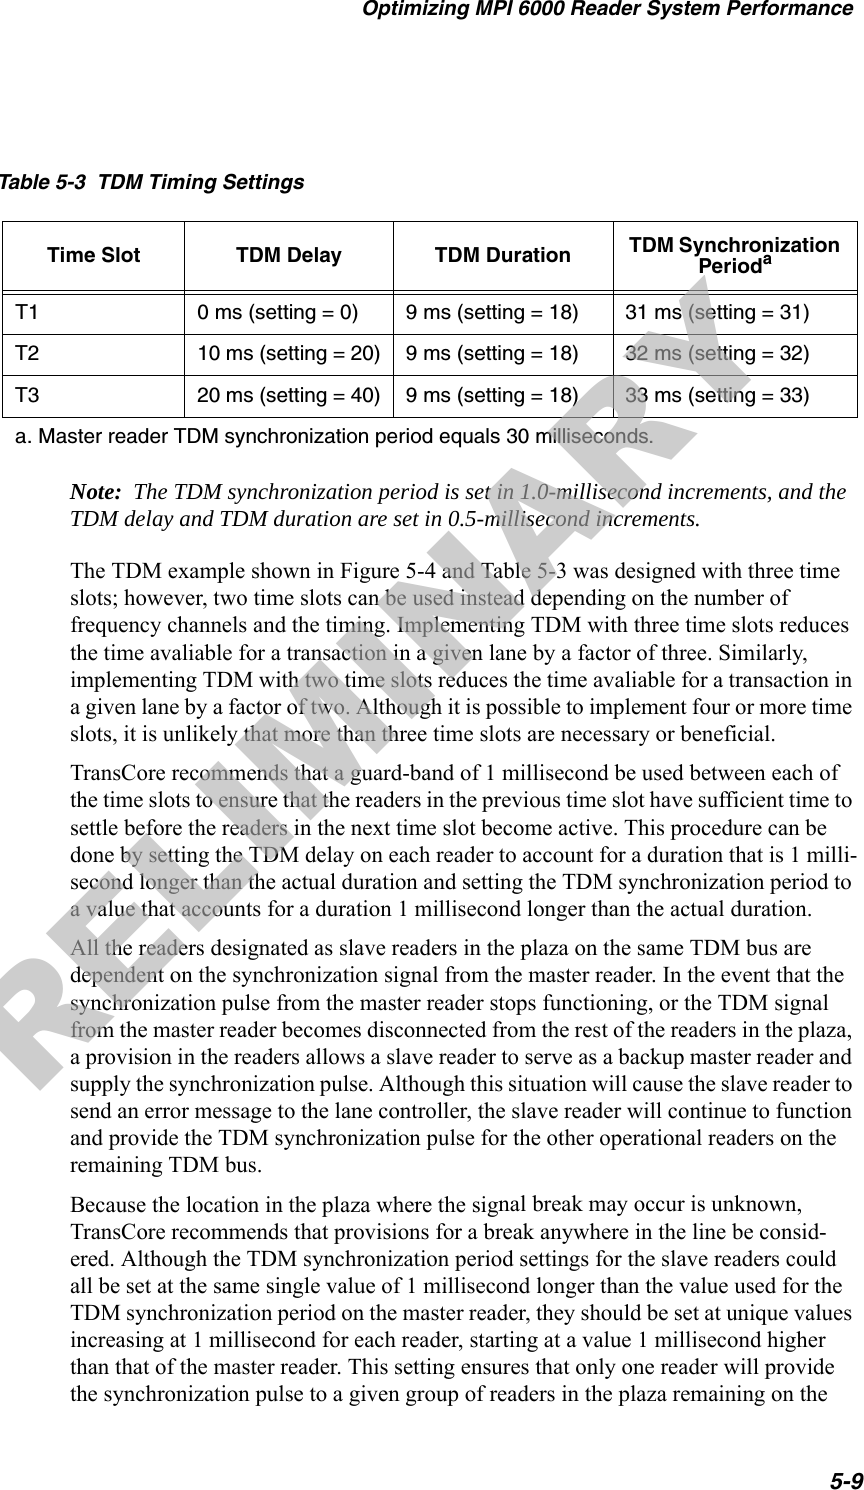 Optimizing MPI 6000 Reader System Performance5-9Note:  The TDM synchronization period is set in 1.0-millisecond increments, and the TDM delay and TDM duration are set in 0.5-millisecond increments.The TDM example shown in Figure 5-4 and Table 5-3 was designed with three time slots; however, two time slots can be used instead depending on the number of frequency channels and the timing. Implementing TDM with three time slots reduces the time avaliable for a transaction in a given lane by a factor of three. Similarly, implementing TDM with two time slots reduces the time avaliable for a transaction in a given lane by a factor of two. Although it is possible to implement four or more time slots, it is unlikely that more than three time slots are necessary or beneficial.TransCore recommends that a guard-band of 1 millisecond be used between each of the time slots to ensure that the readers in the previous time slot have sufficient time to settle before the readers in the next time slot become active. This procedure can be done by setting the TDM delay on each reader to account for a duration that is 1 milli-second longer than the actual duration and setting the TDM synchronization period to a value that accounts for a duration 1 millisecond longer than the actual duration.All the readers designated as slave readers in the plaza on the same TDM bus are dependent on the synchronization signal from the master reader. In the event that the synchronization pulse from the master reader stops functioning, or the TDM signal from the master reader becomes disconnected from the rest of the readers in the plaza, a provision in the readers allows a slave reader to serve as a backup master reader and supply the synchronization pulse. Although this situation will cause the slave reader to send an error message to the lane controller, the slave reader will continue to function and provide the TDM synchronization pulse for the other operational readers on the remaining TDM bus.Because the location in the plaza where the signal break may occur is unknown, TransCore recommends that provisions for a break anywhere in the line be consid-ered. Although the TDM synchronization period settings for the slave readers could all be set at the same single value of 1 millisecond longer than the value used for the TDM synchronization period on the master reader, they should be set at unique values increasing at 1 millisecond for each reader, starting at a value 1 millisecond higher than that of the master reader. This setting ensures that only one reader will provide the synchronization pulse to a given group of readers in the plaza remaining on the Table 5-3  TDM Timing SettingsTime Slot TDM Delay TDM Duration TDM Synchronization PeriodaT1 0 ms (setting = 0) 9 ms (setting = 18) 31 ms (setting = 31)T2 10 ms (setting = 20) 9 ms (setting = 18) 32 ms (setting = 32)T3 20 ms (setting = 40) 9 ms (setting = 18) 33 ms (setting = 33)a. Master reader TDM synchronization period equals 30 milliseconds.PRELIMINARY